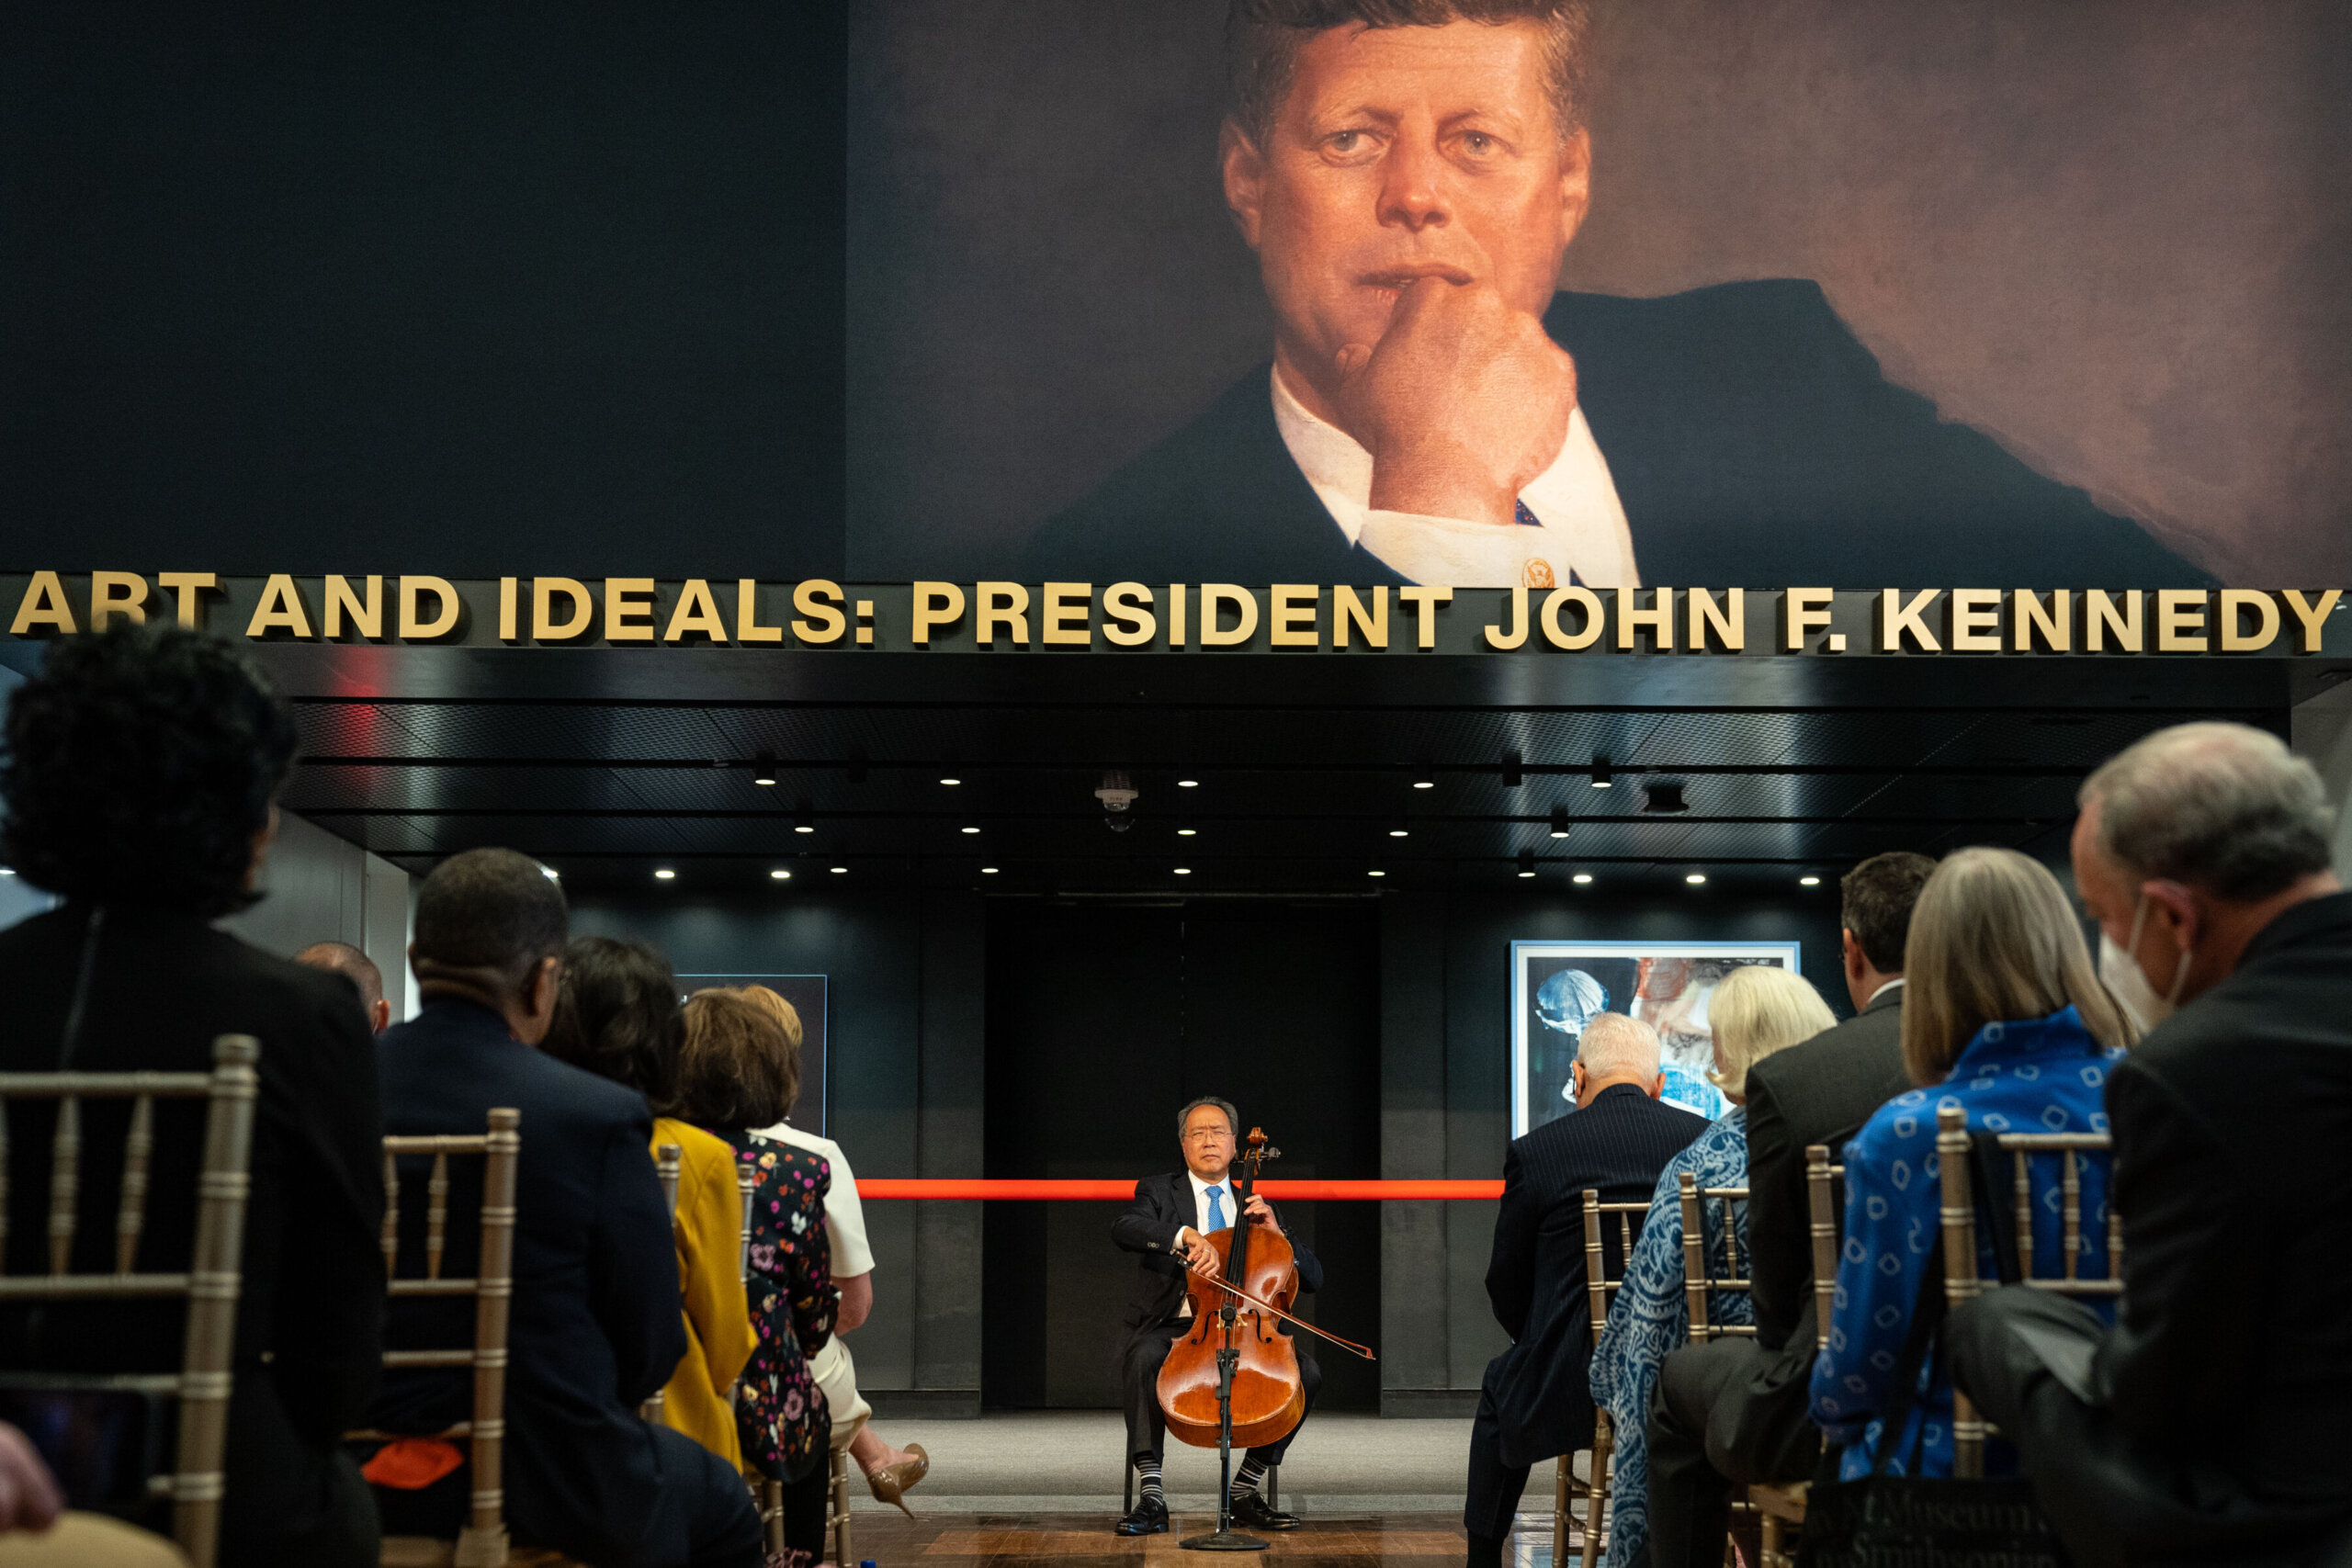 JFK's love of the arts shines in a new Kennedy Center exhibition